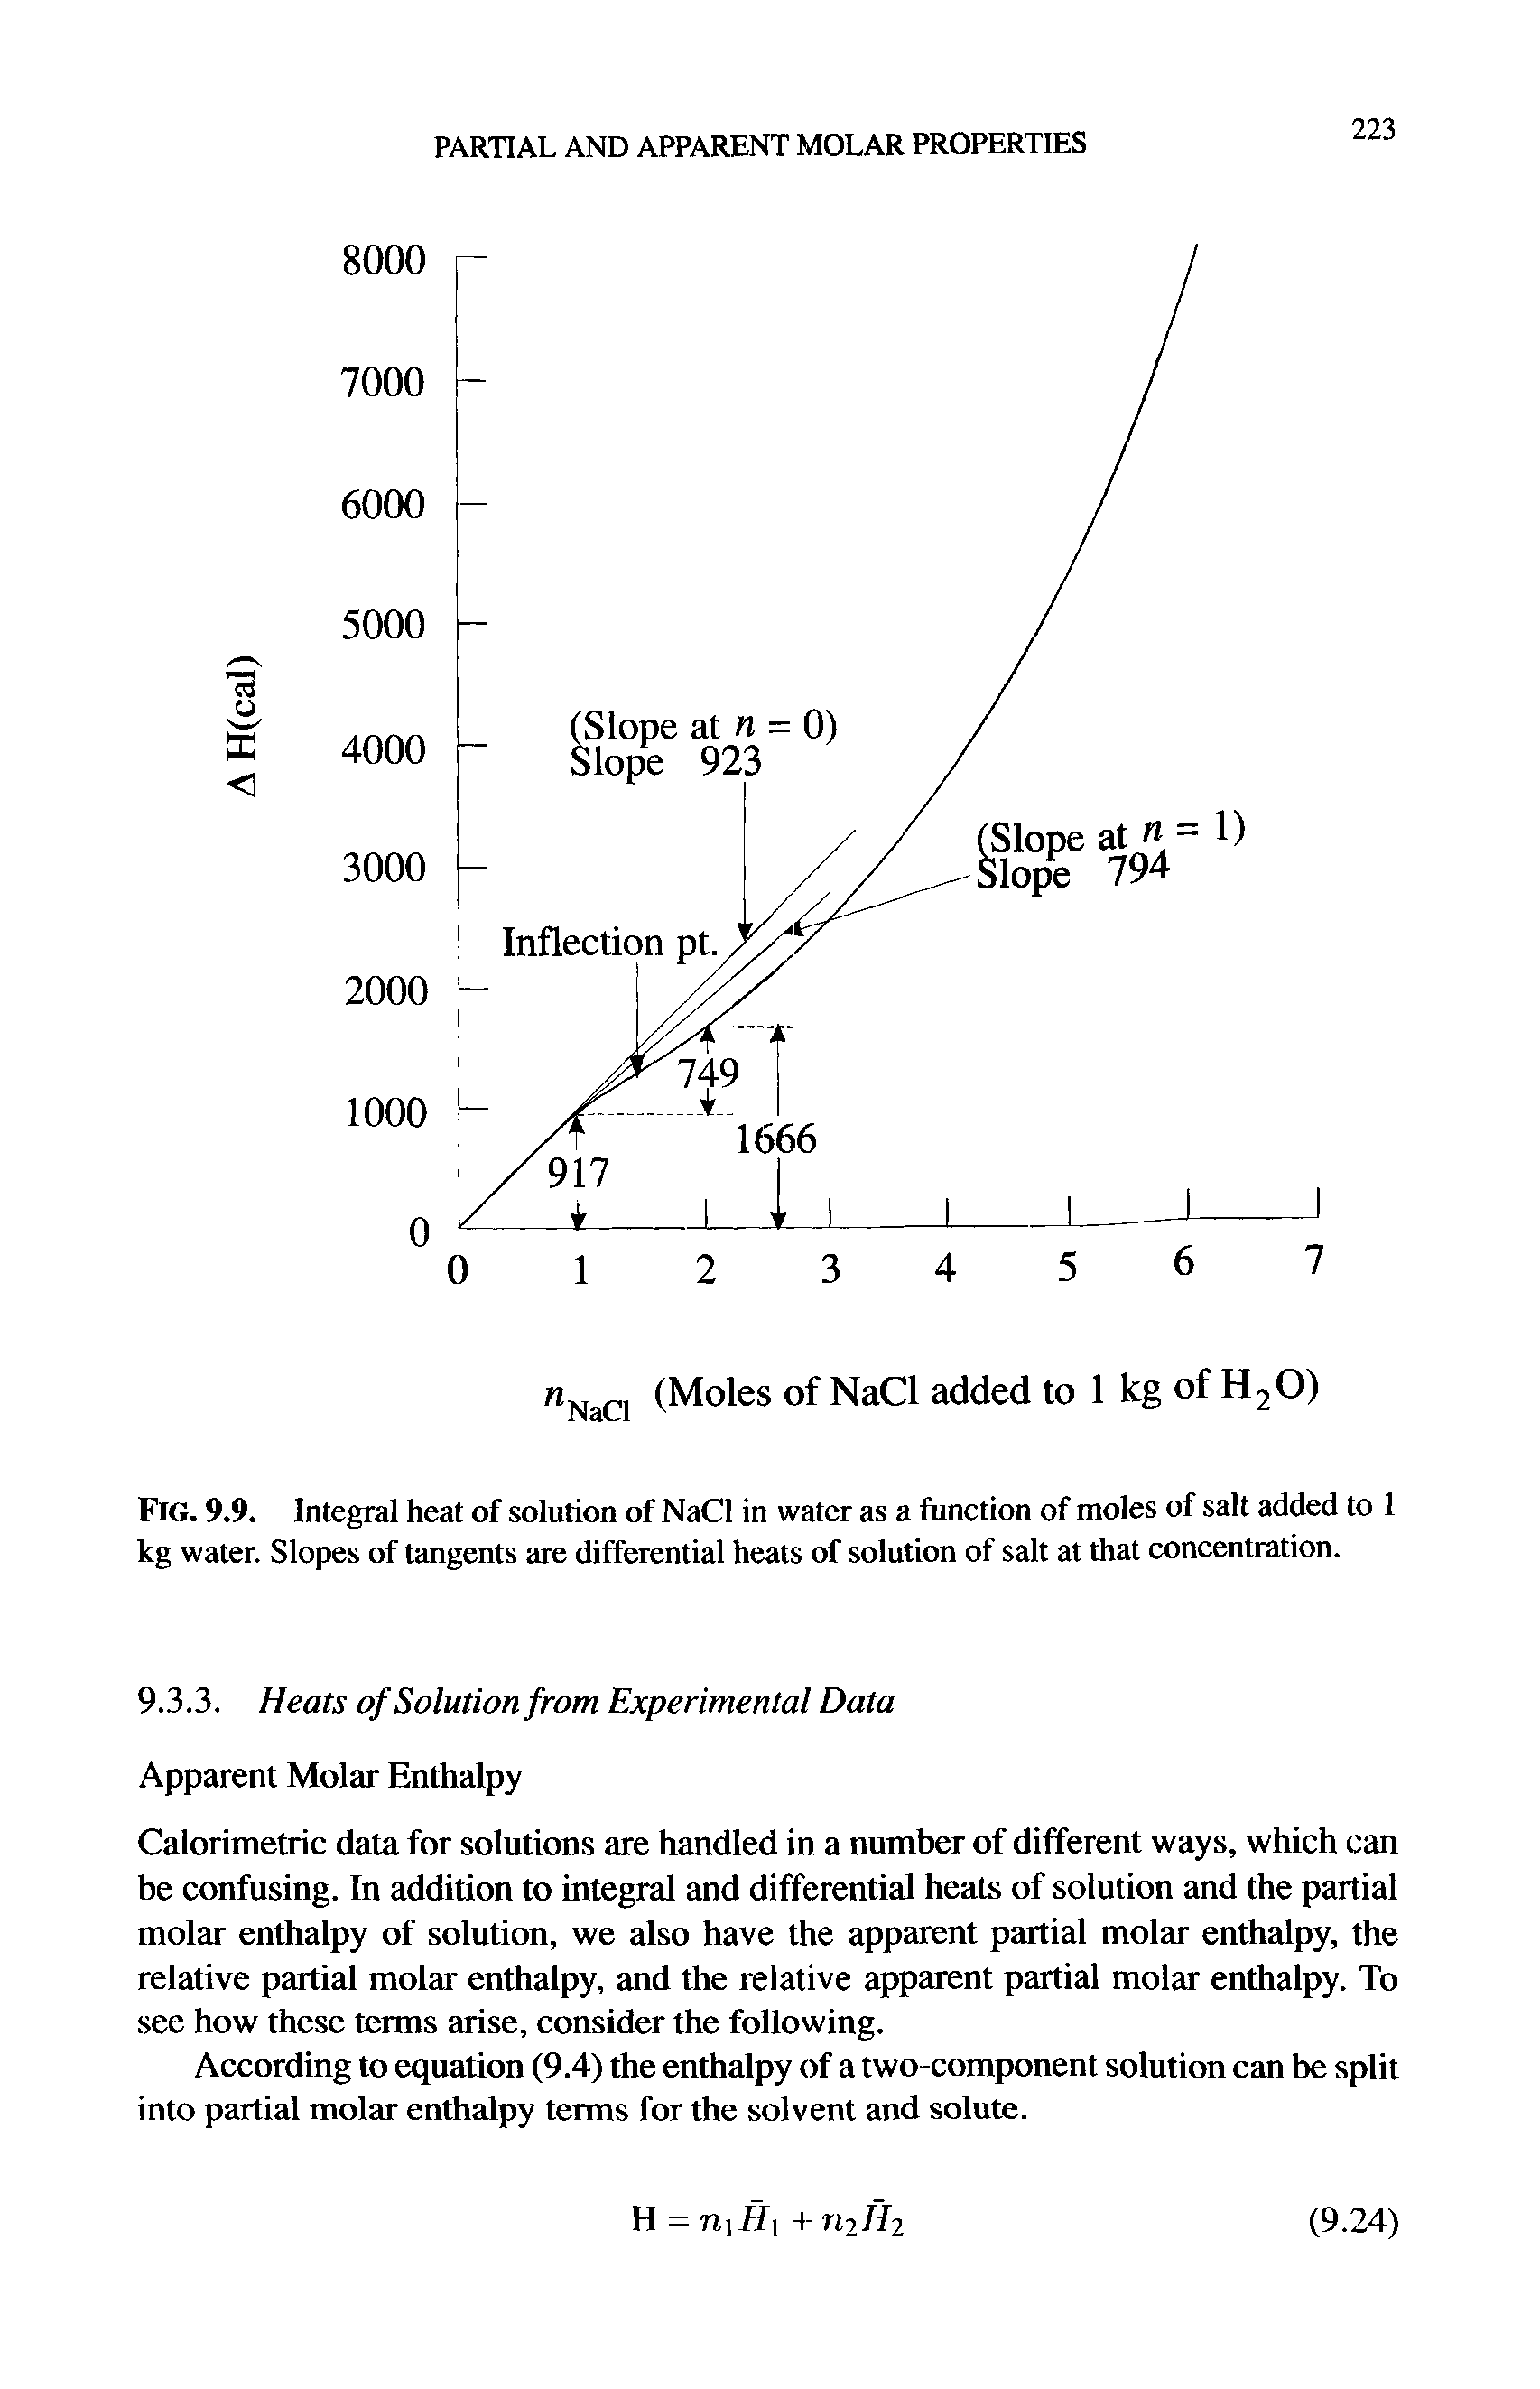 Fig. 9.9. Integral heat of solution of NaCl in water as a function of moles of salt added to 1 kg water. Slopes of tangents are differential heats of solution of salt at that concentration.